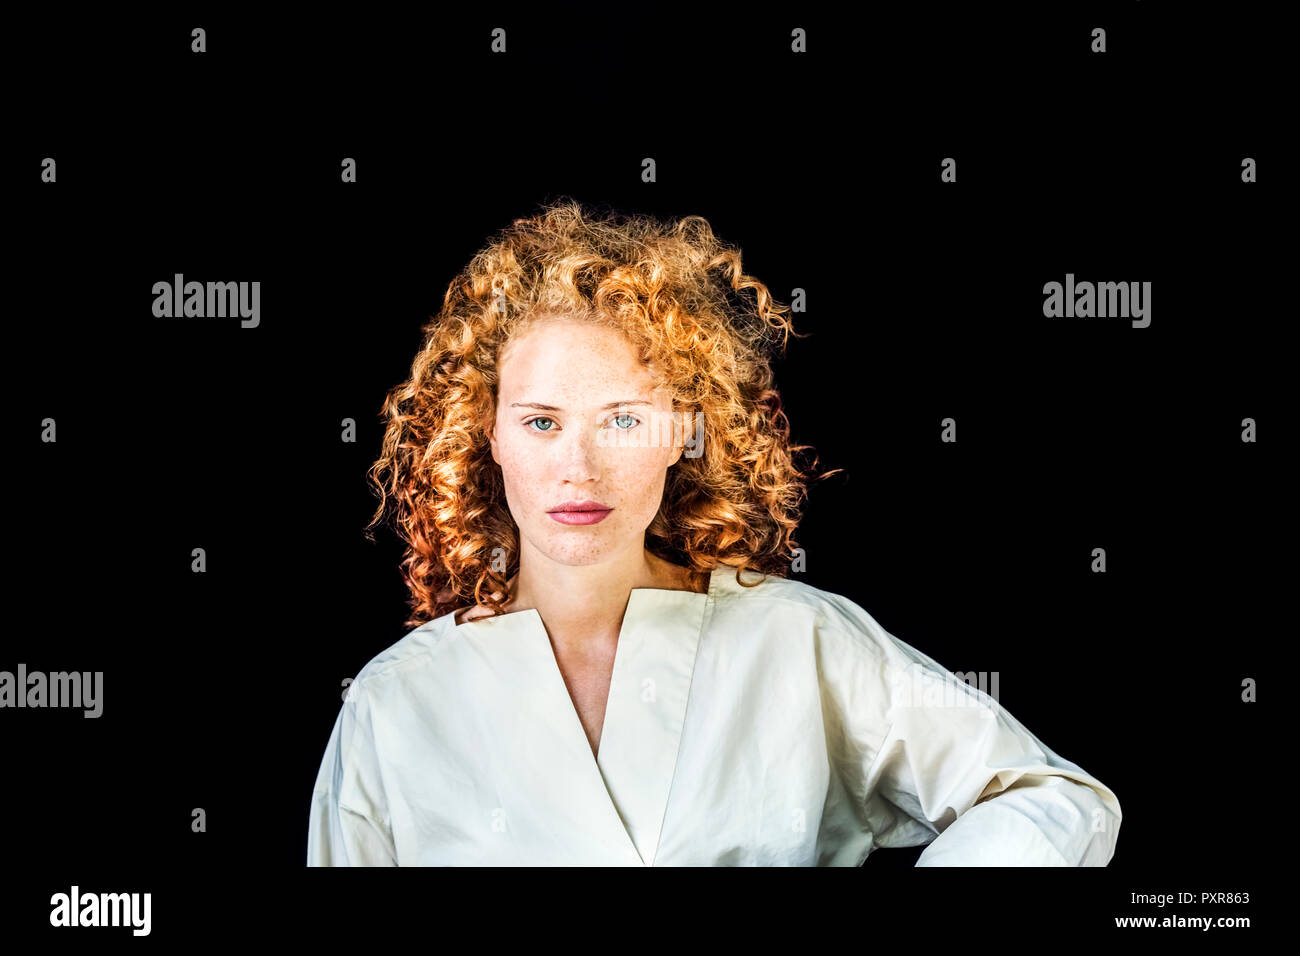 Portrait of serious young woman with curly red hair in front of black background Stock Photo